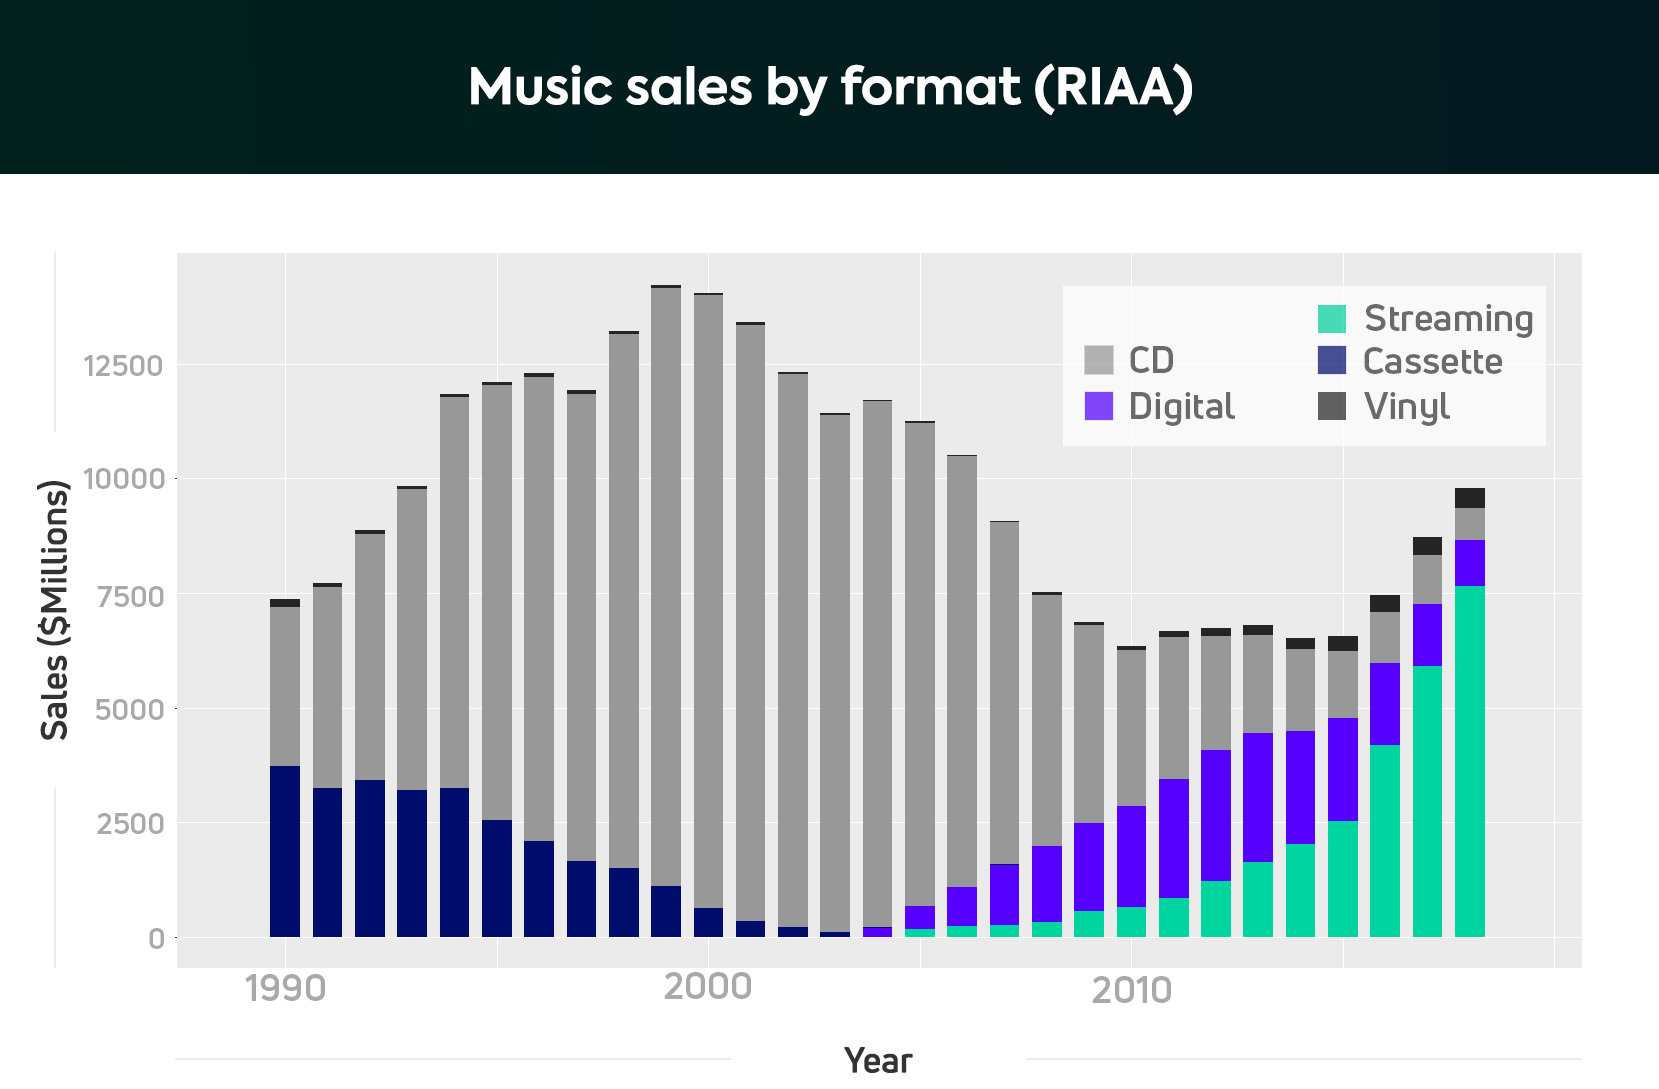 A chart showing RIAA statistics about music sales by format, including cassette tape, vinyl, CD, digital, and streaming.